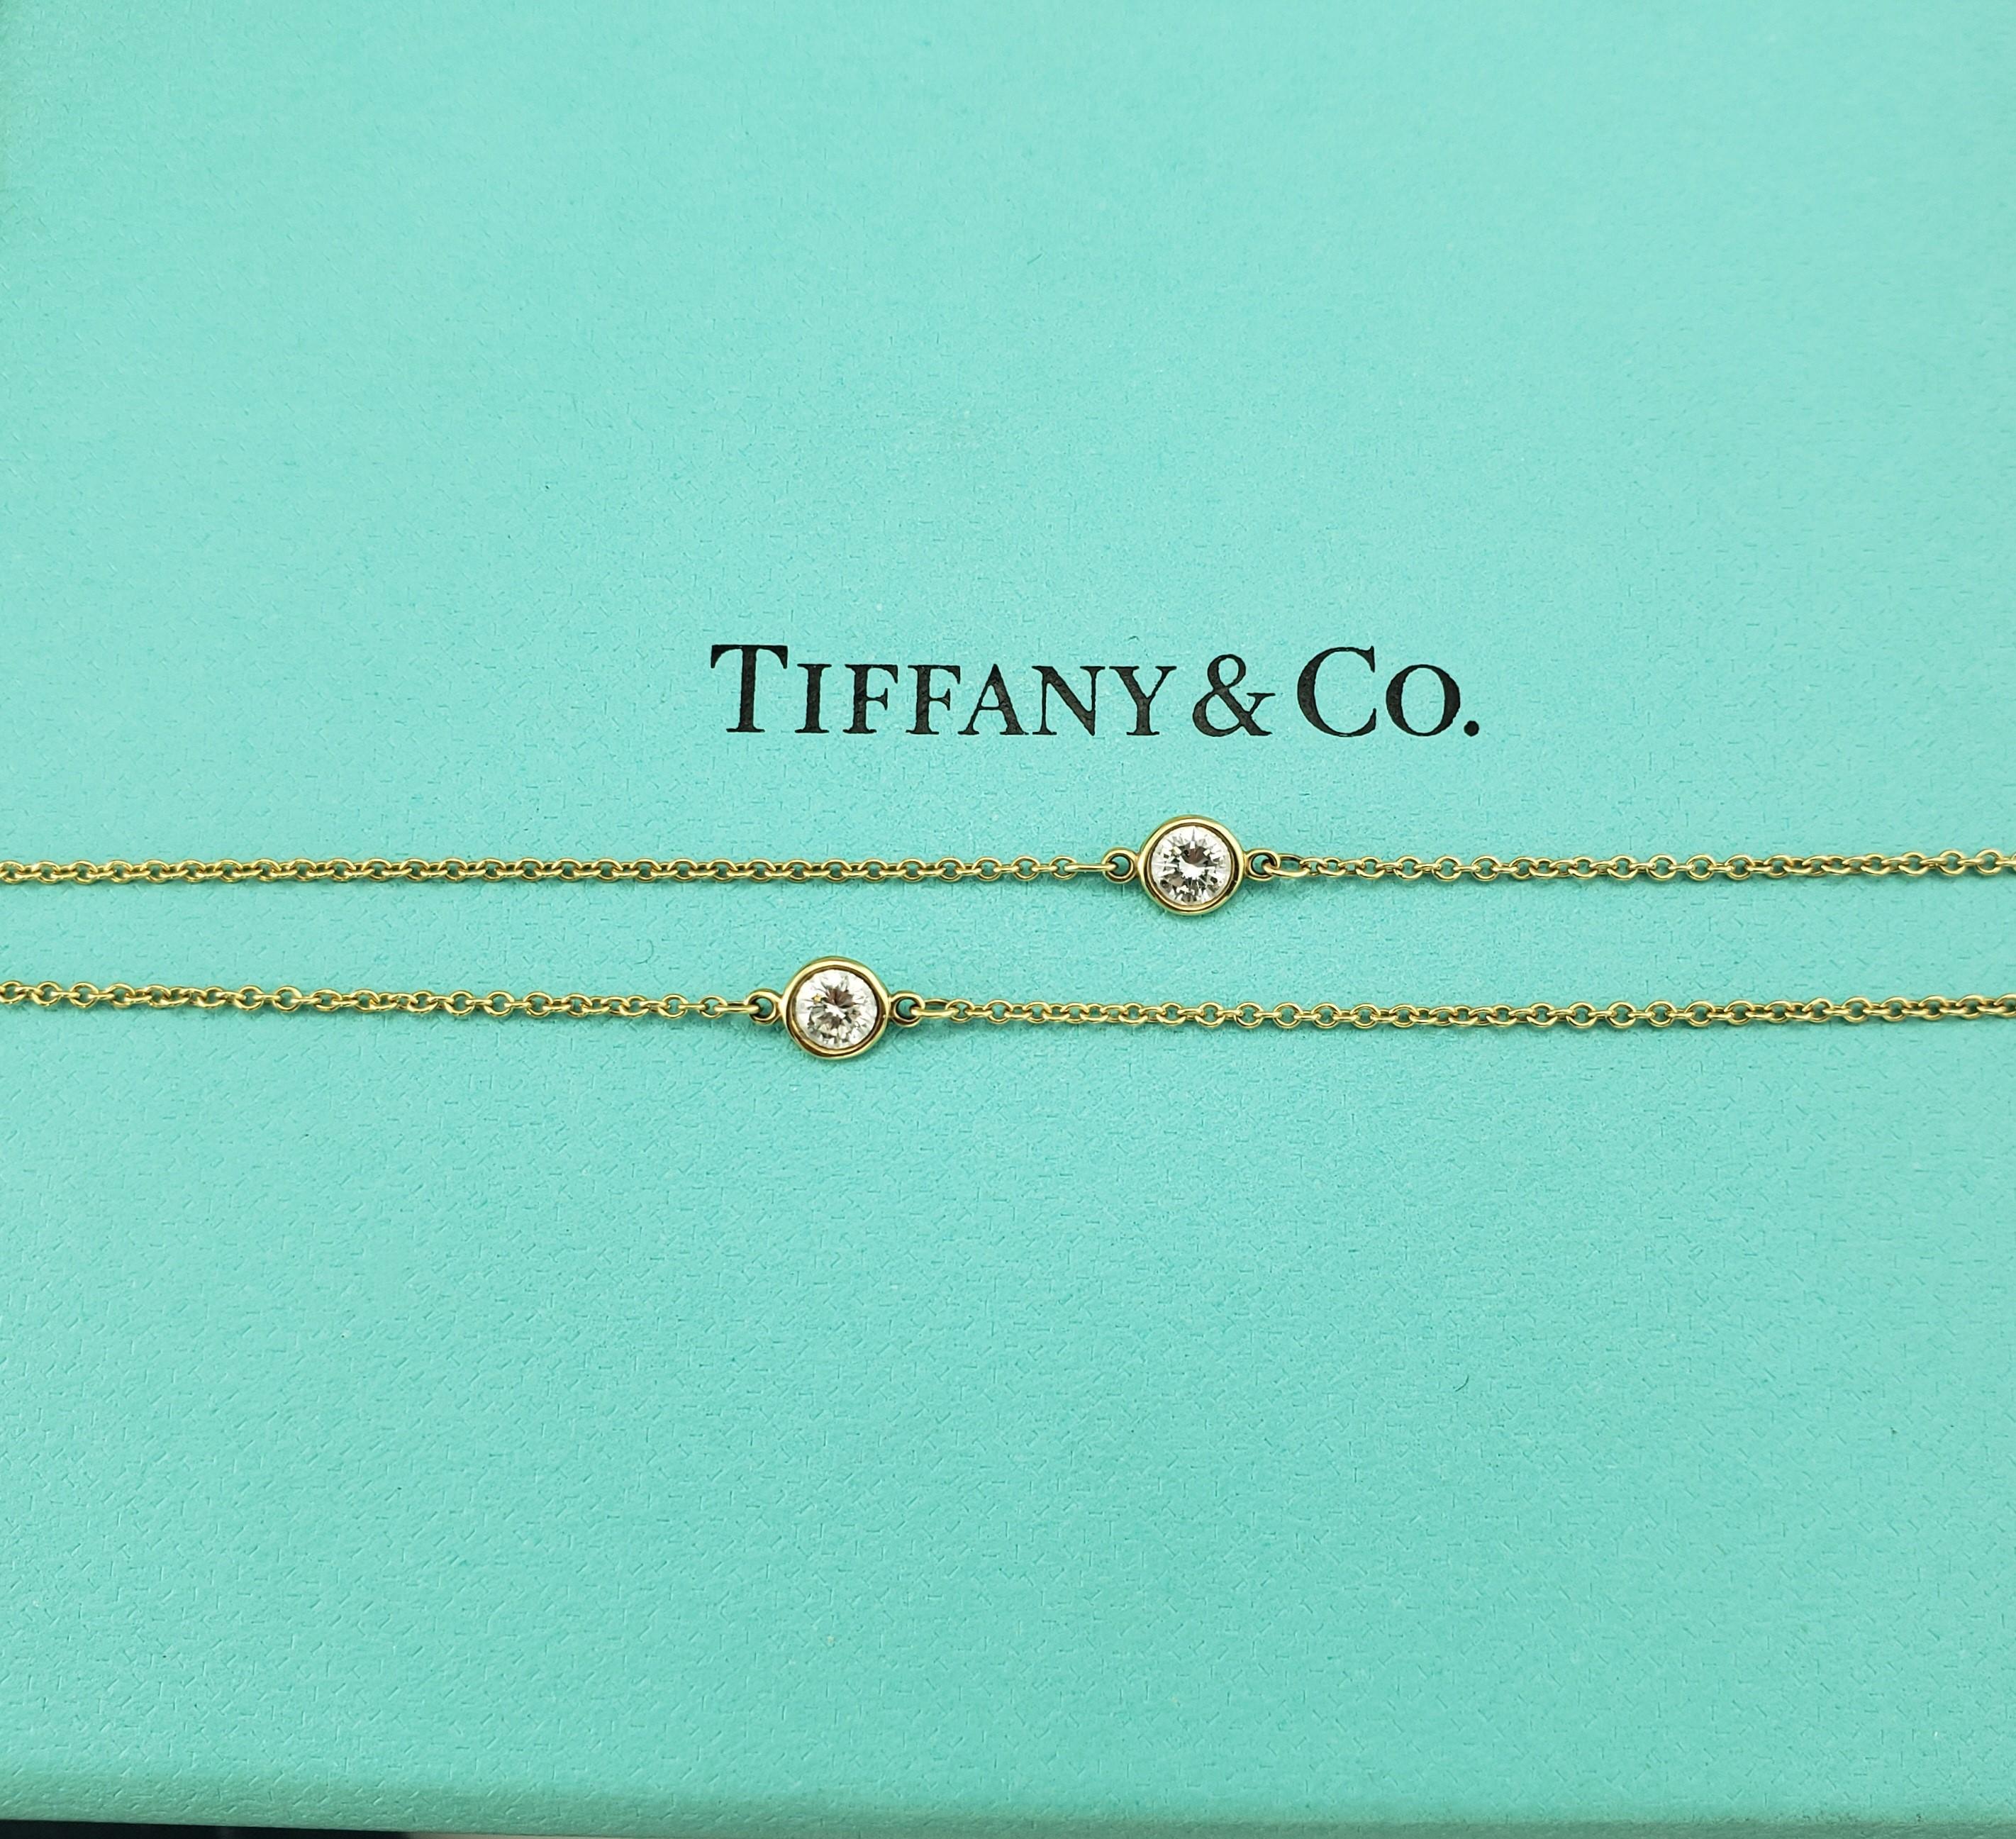 Tiffany & Co. Elsa Peretti 18K Yellow Gold Diamond By Yard Necklace #17056 For Sale 6